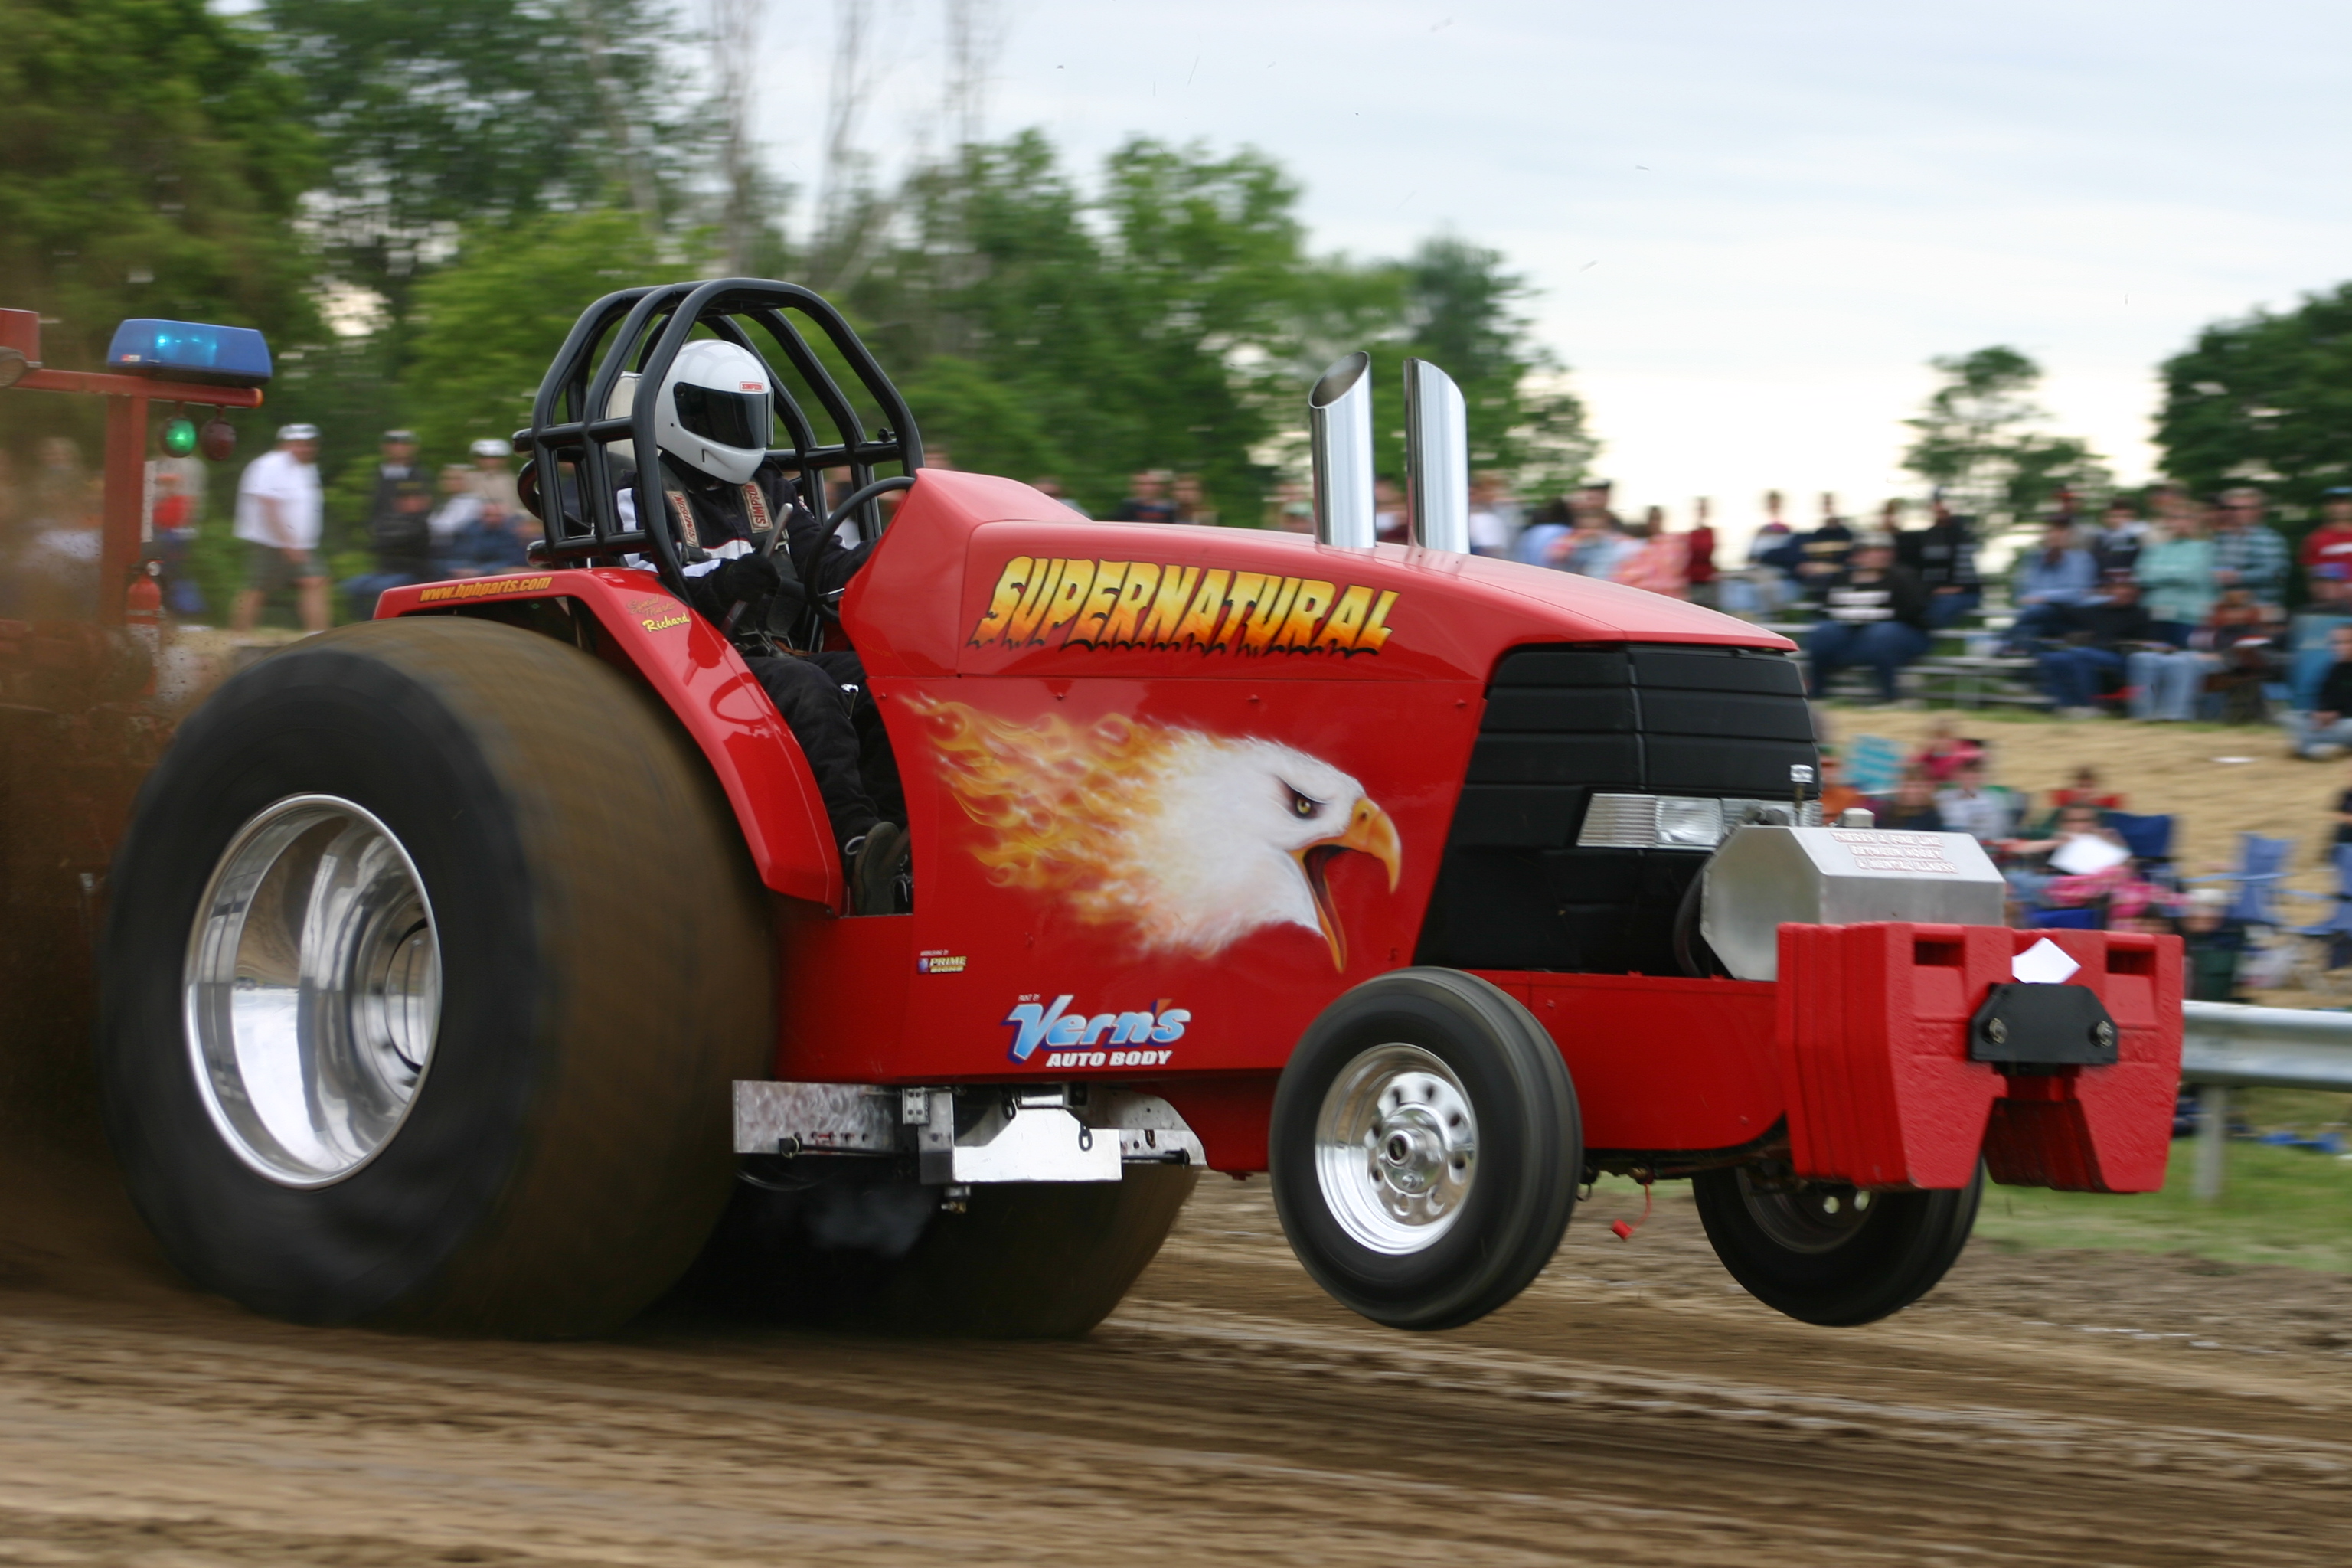 TRACTOR PULLING race racing hot rod rods tractor f wallpaper 3072x2048